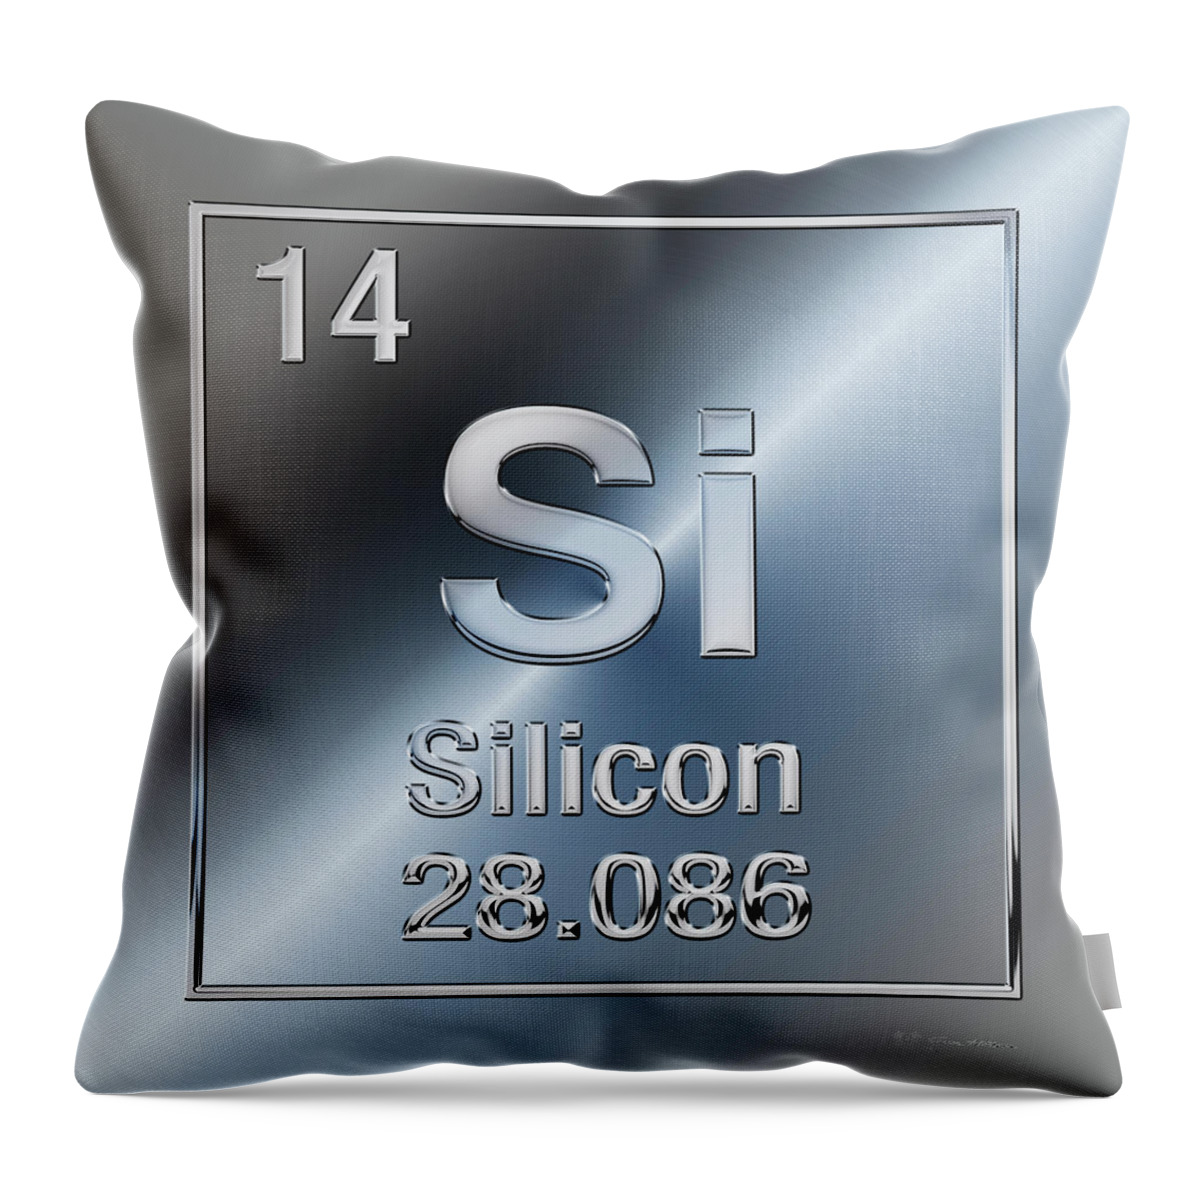 ‘the Elements’ Collection By Serge Averbukh Throw Pillow featuring the digital art Periodic Table of Elements - Silicon - Si by Serge Averbukh